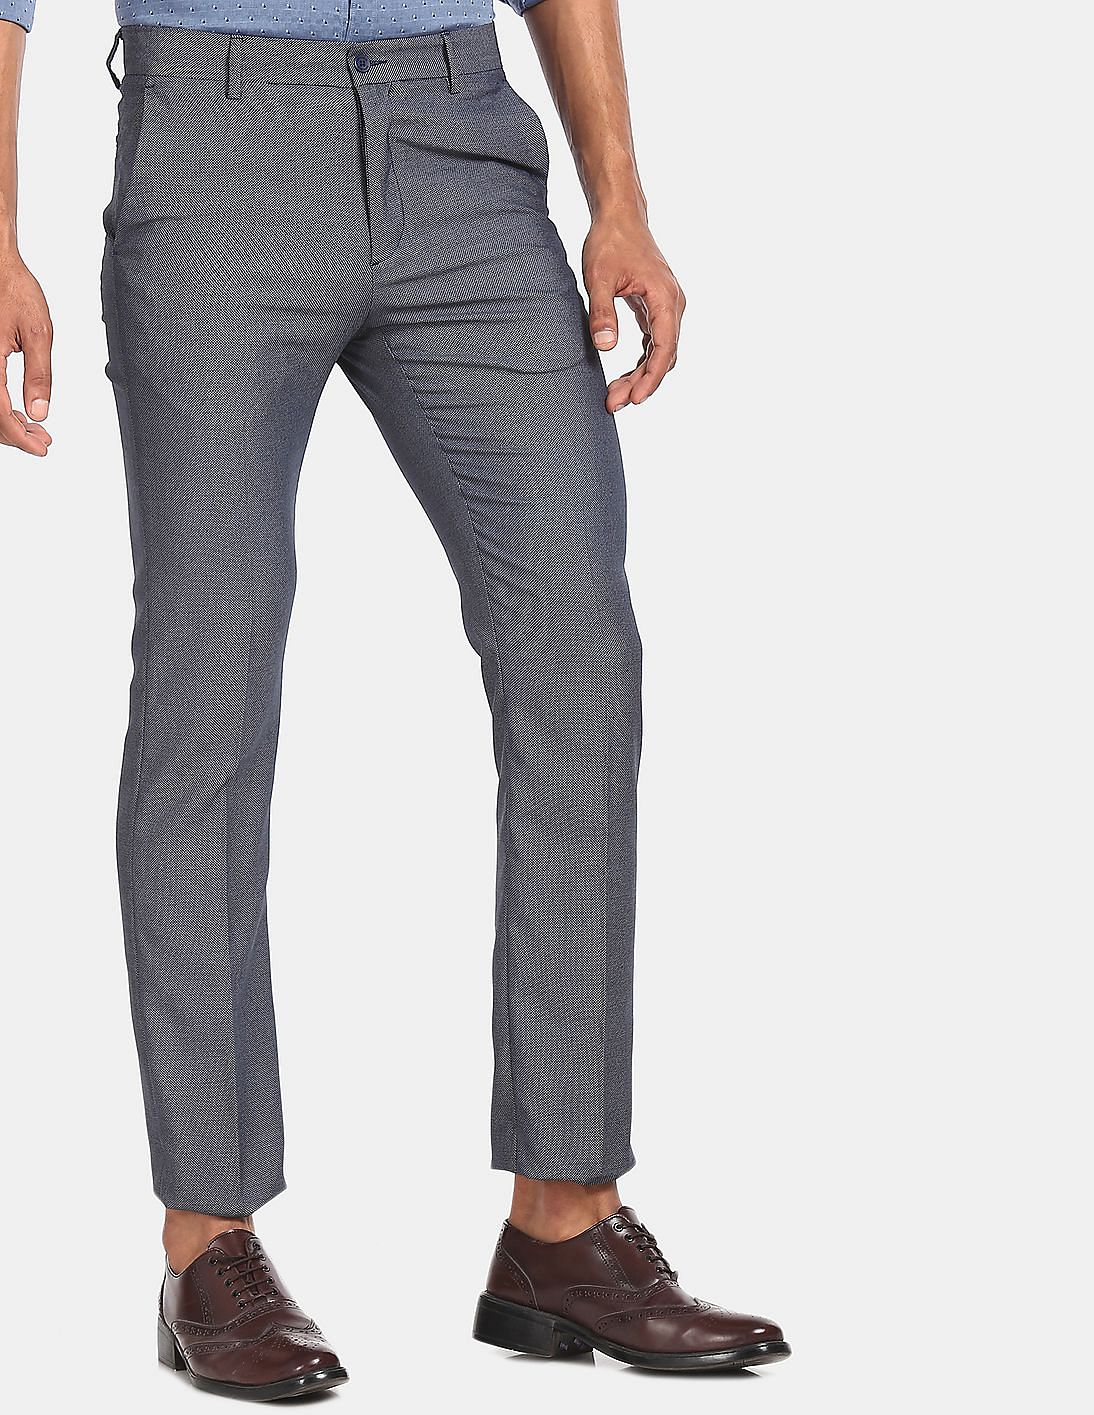 Excalibur Beige Slim Fit Flat Trousers  Buy Excalibur Beige Slim Fit  Flat Trousers Online at Low Price in India  Snapdeal